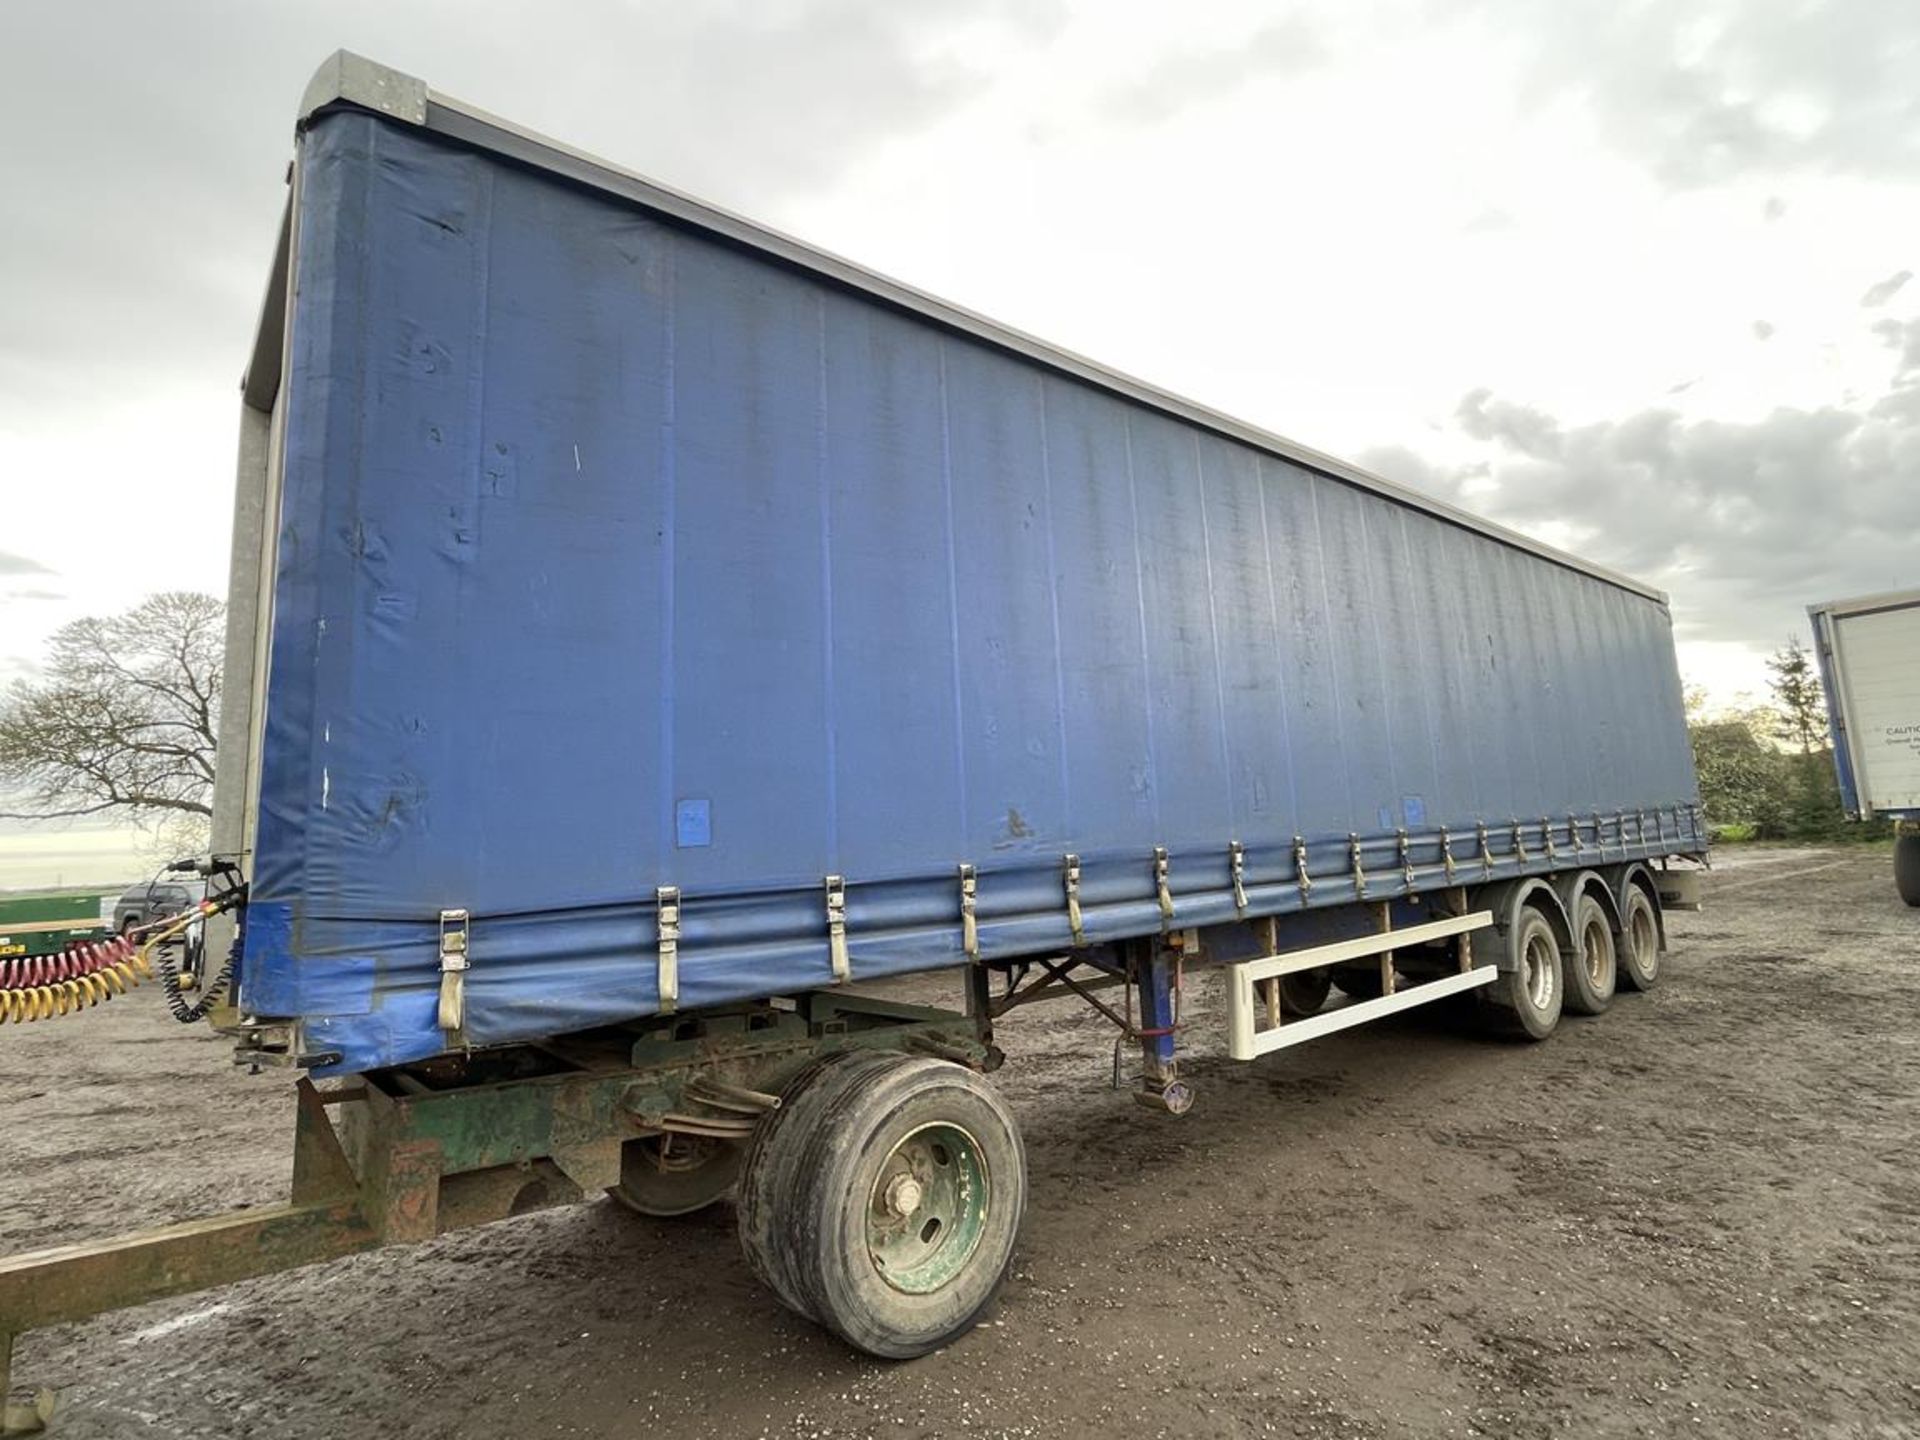 2006 Montracon EB+ ADR 25/2M Triple Axle Curtainside Trailer, VIN: 24688 with Rear Barn Doors. - Image 2 of 12